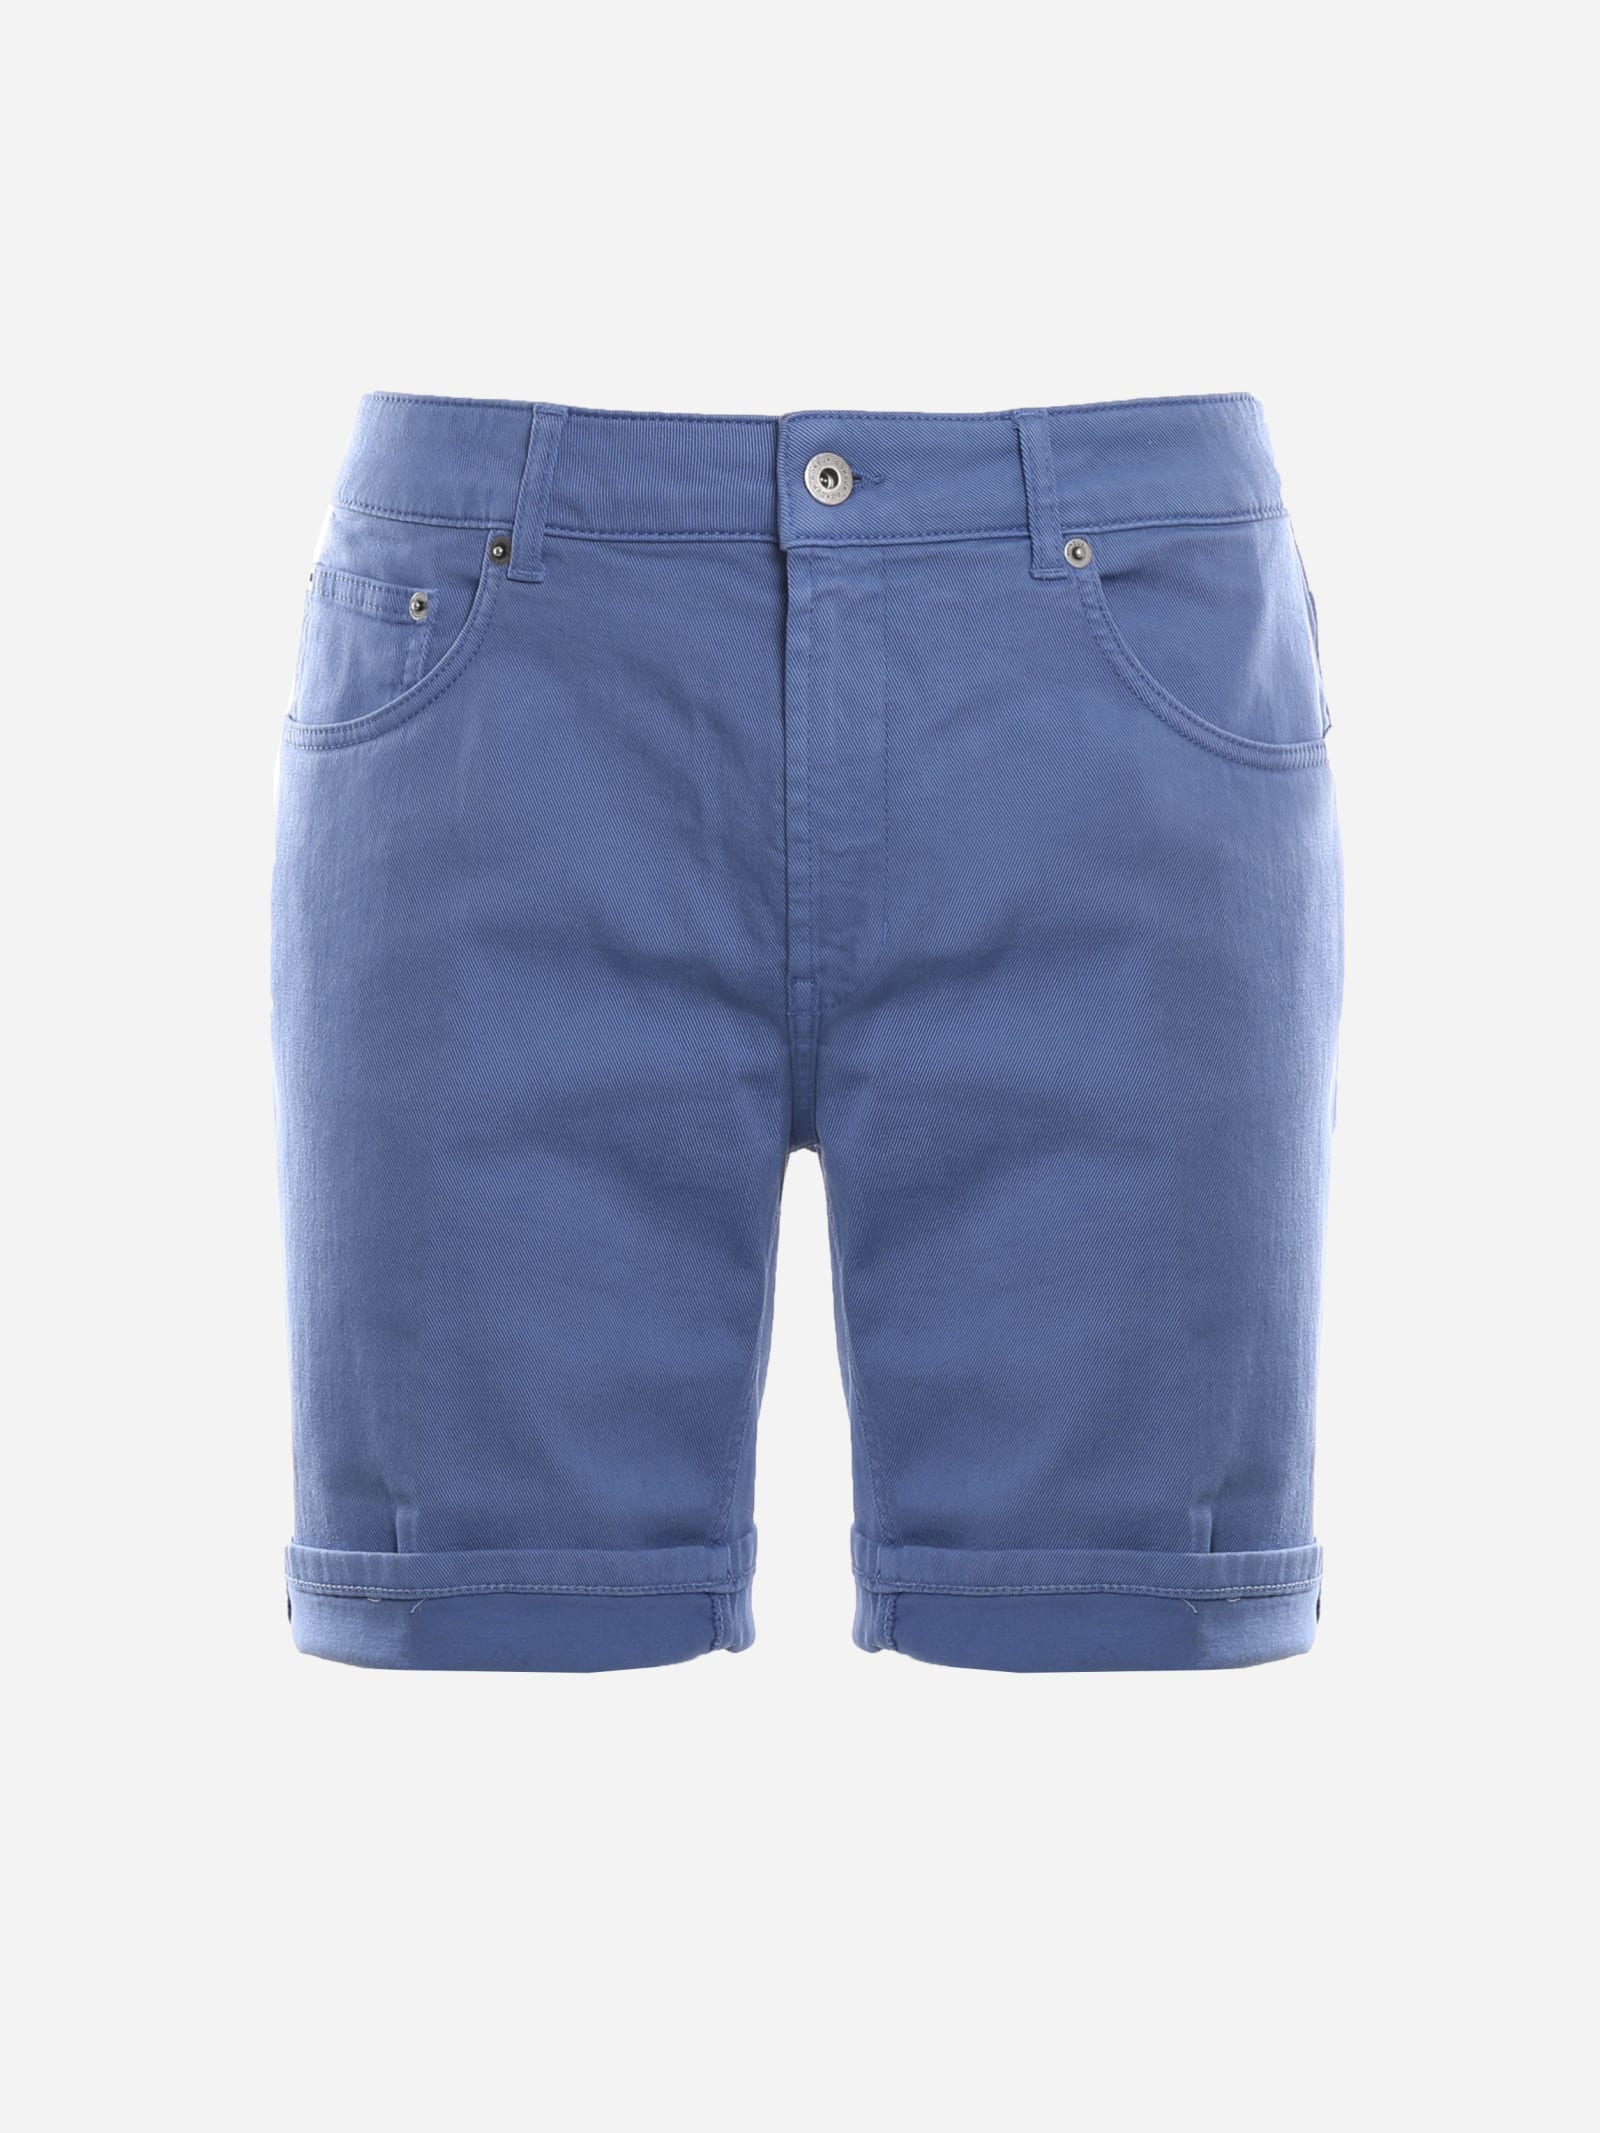 Dondup Cotton Drill Shorts With Cuffs At The Bottom